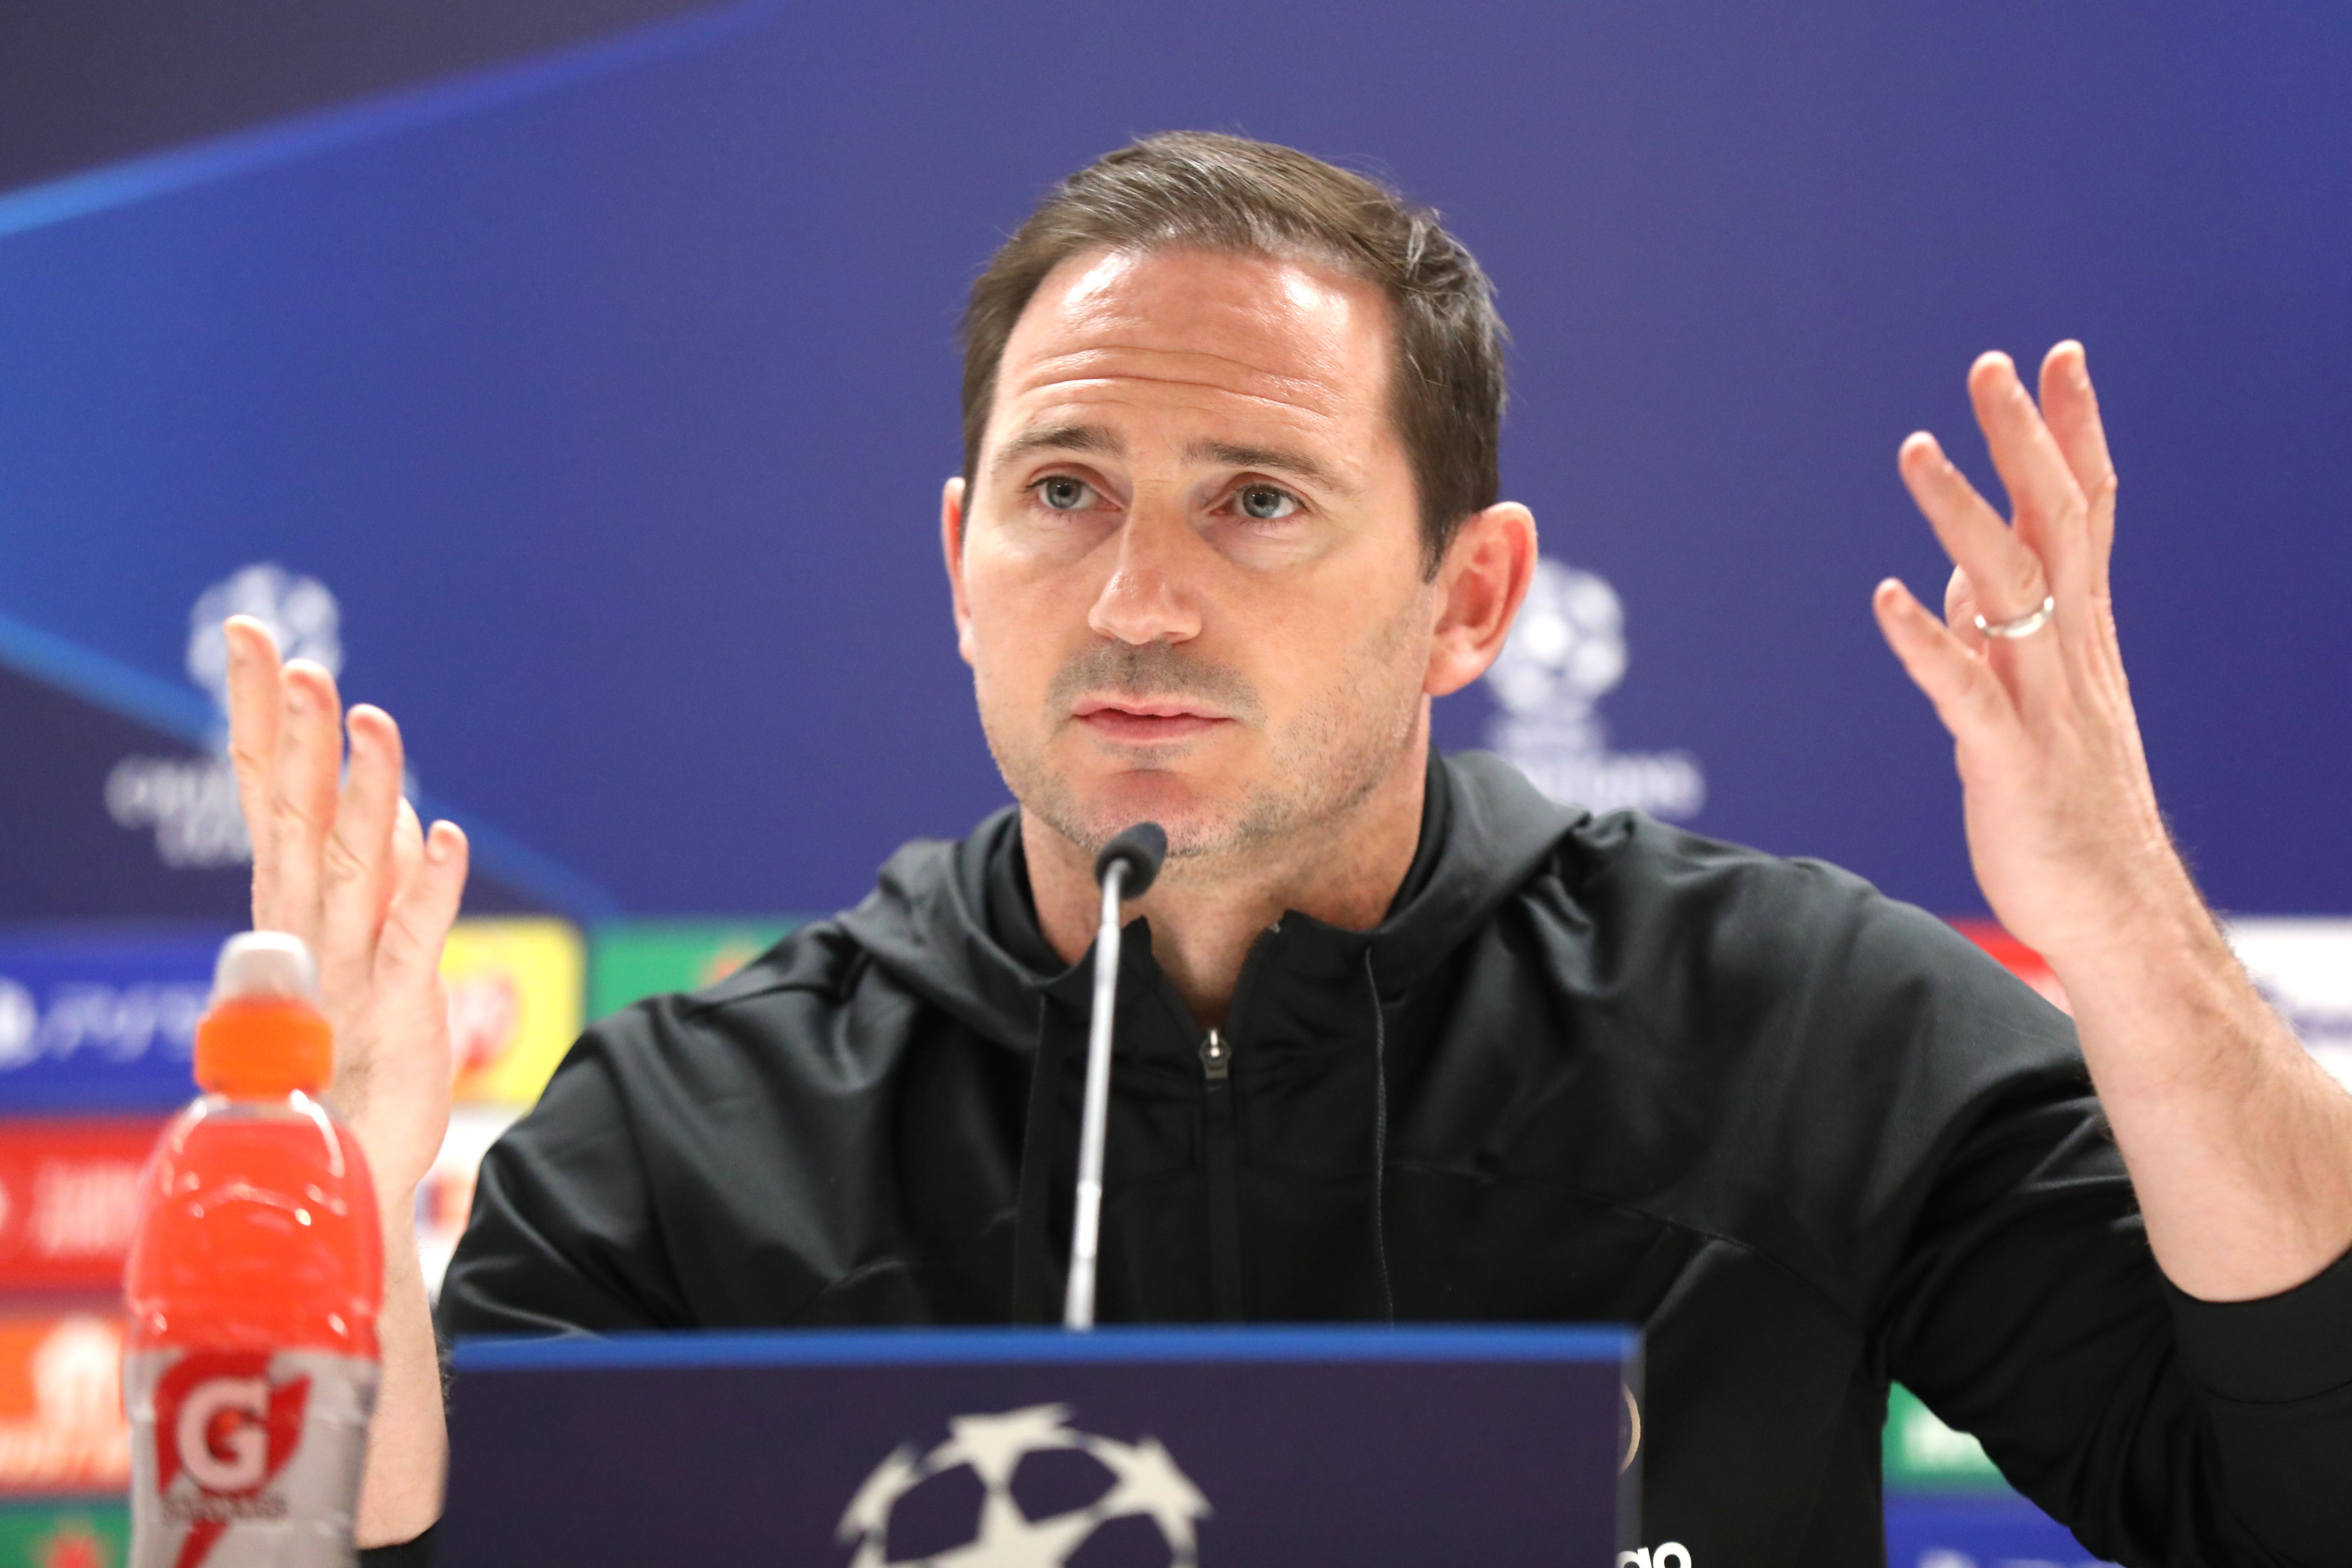 Europe offers Chelsea a break from their Premier League struggles, says Frank Lampard (Isabel Infantes/PA)